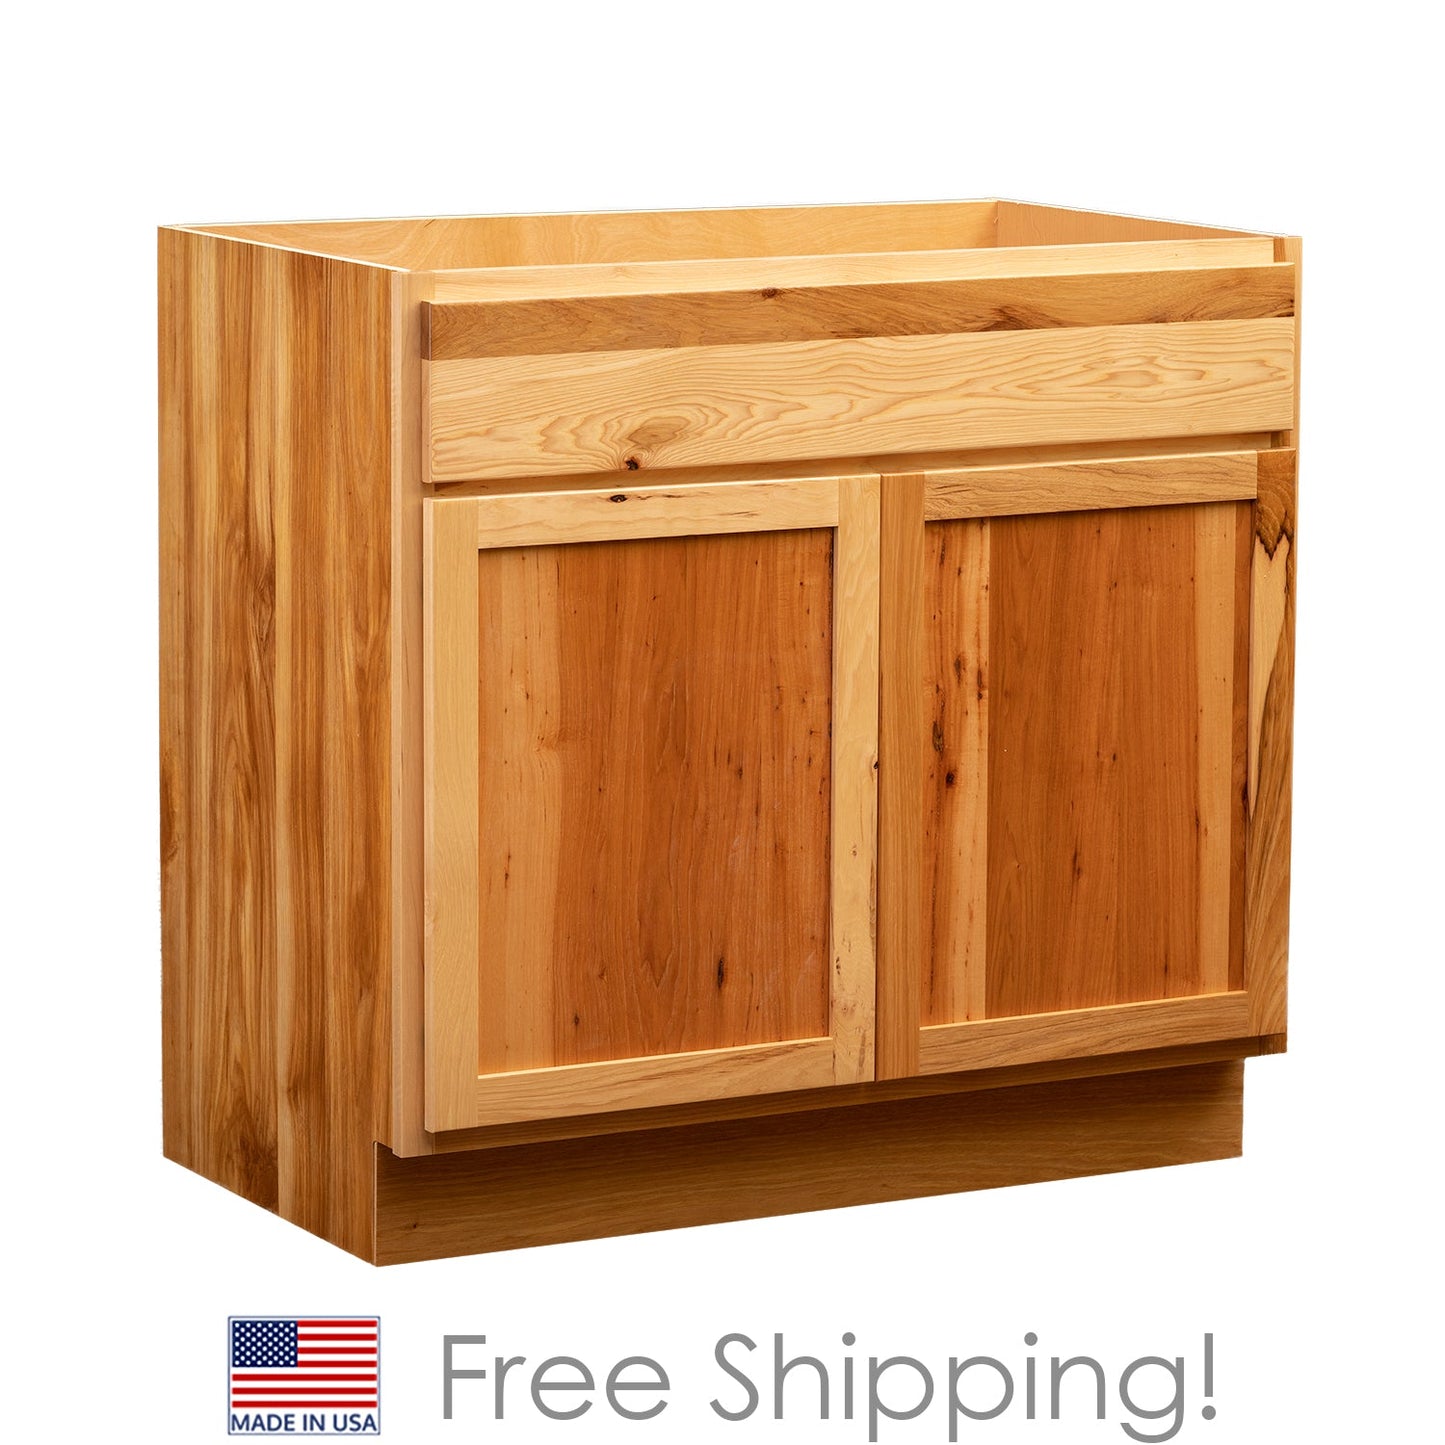 Quicklock RTA (Ready-to-Assemble) Rustic Hickory Vanity Base Cabinet- 48"W x (31.5", 34.5"H)